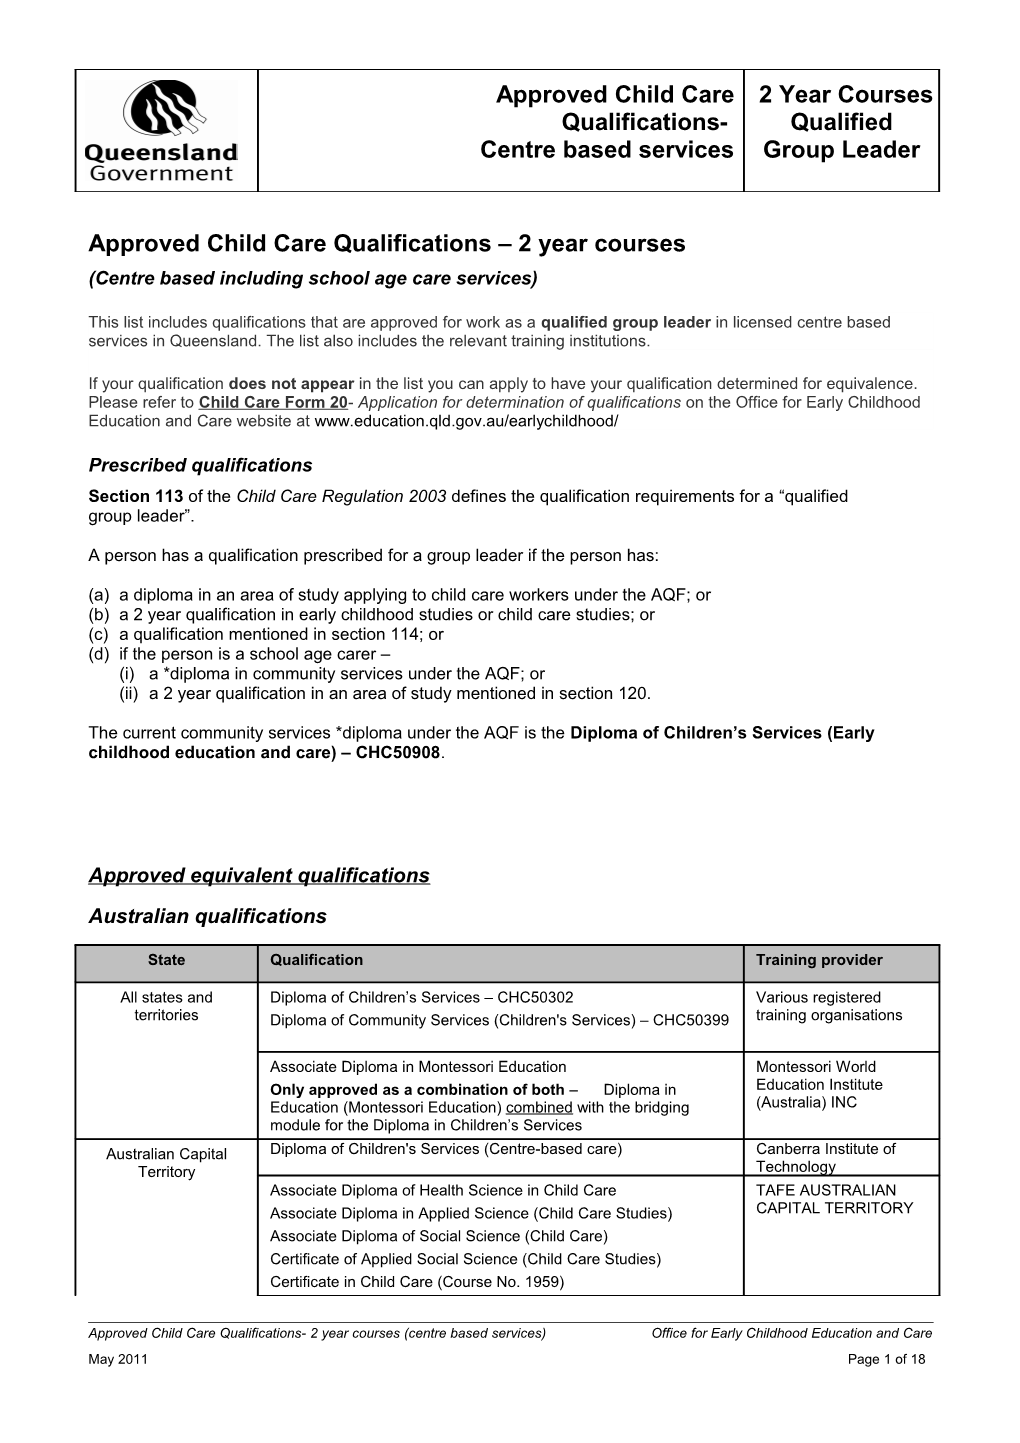 Approved Child Care Qualifications 2 Year Courses